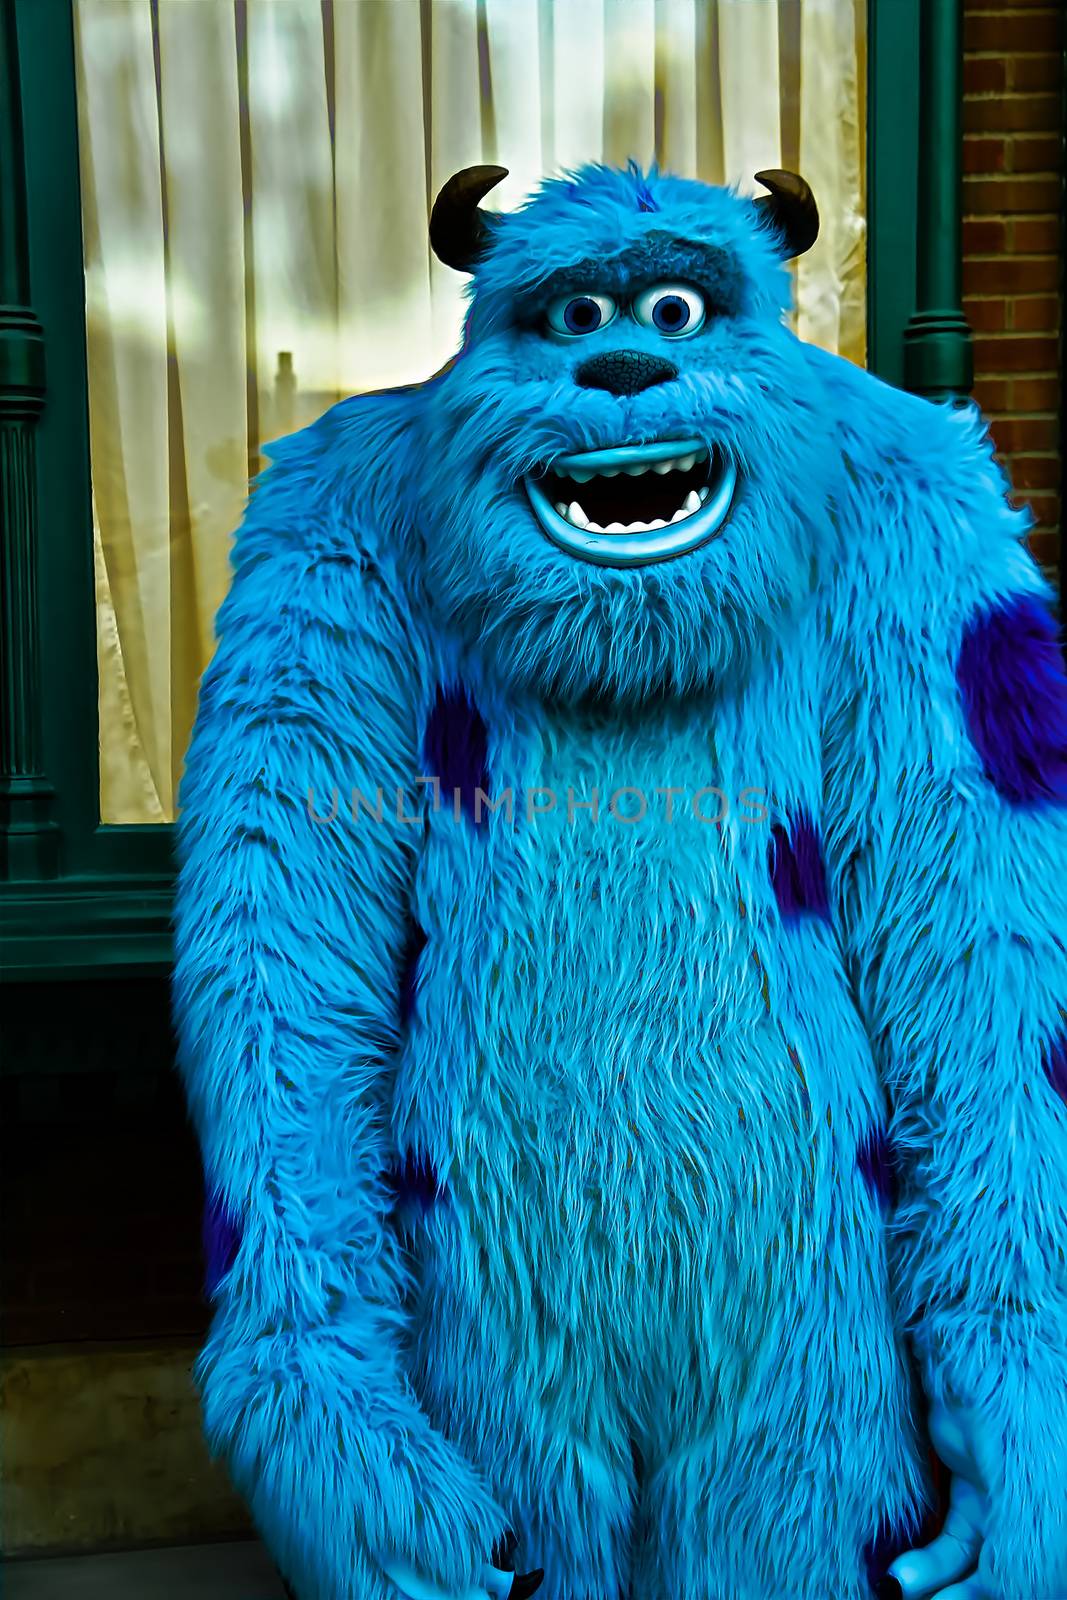 Anaheim,CA/USA - Nov 27, 2010 : A photo of James P. Sullivan, a monster character from Monster Inc at Disneyland in Anaheim.Disney Pixar animation.